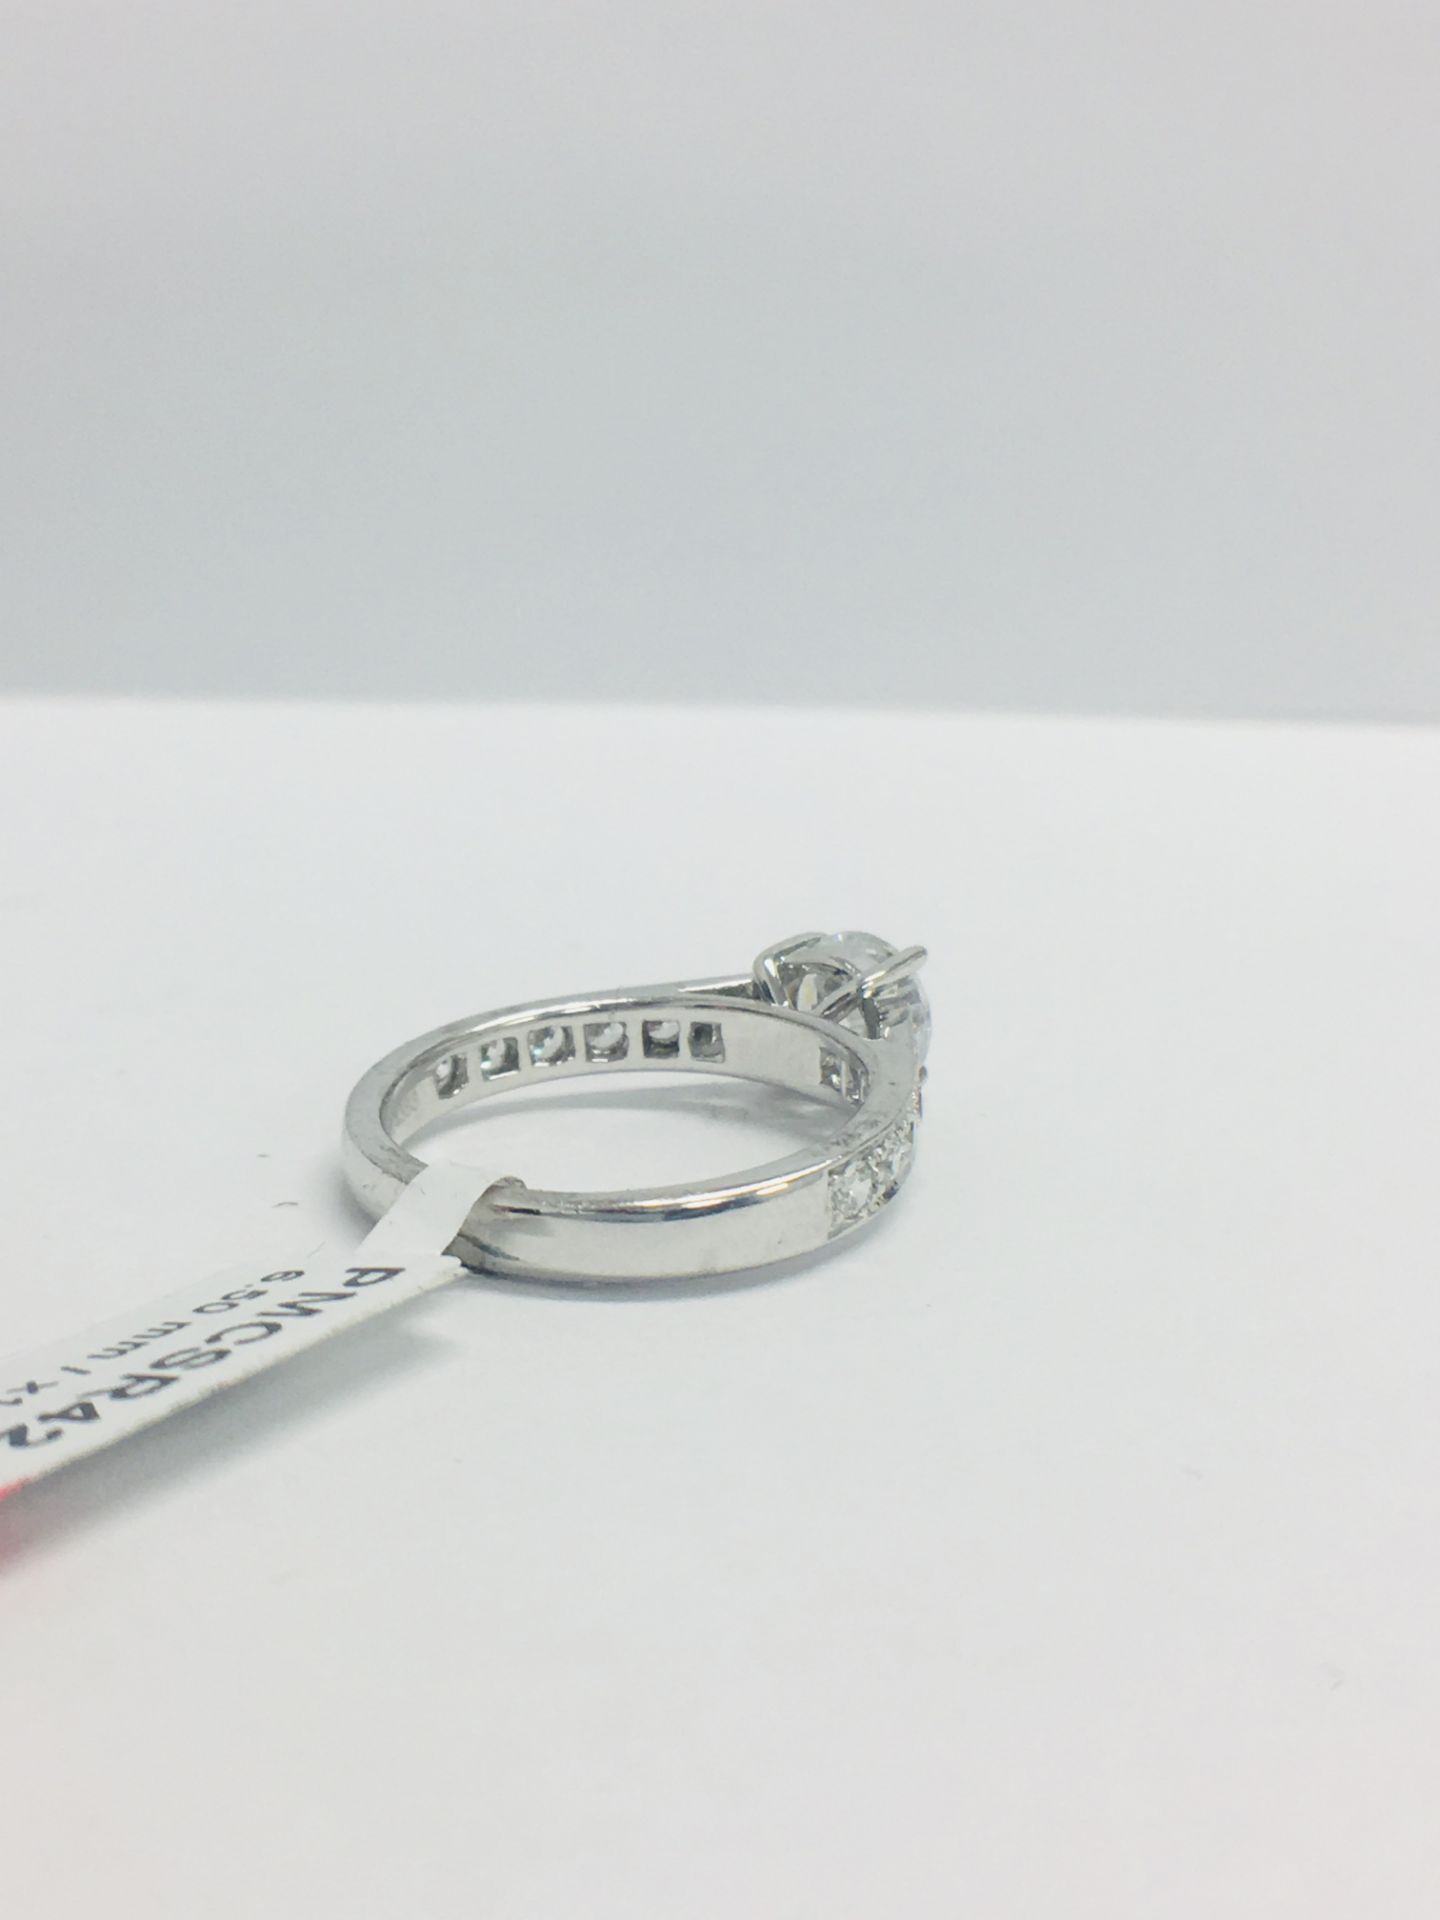 Platinum Diamond Solitaire Ring With Diamond Set Shoulders - Image 8 of 11